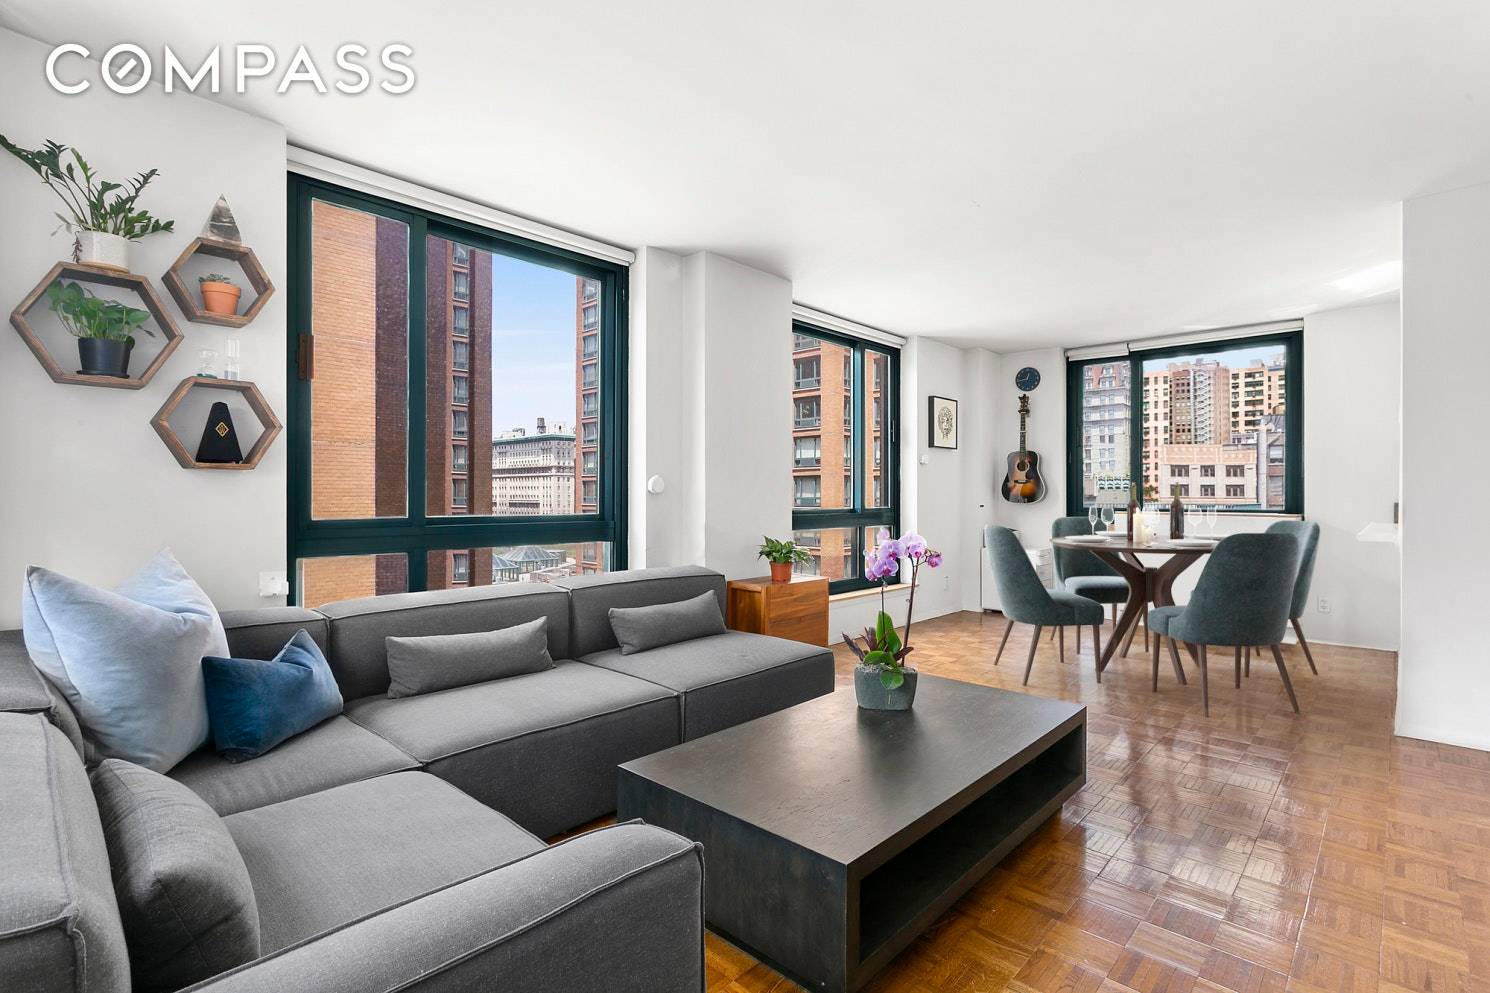 Beautiful light, great space and premier amenities are yours in this updated, one bedroom home in the full service Zeckendorf Towers on Union Square.